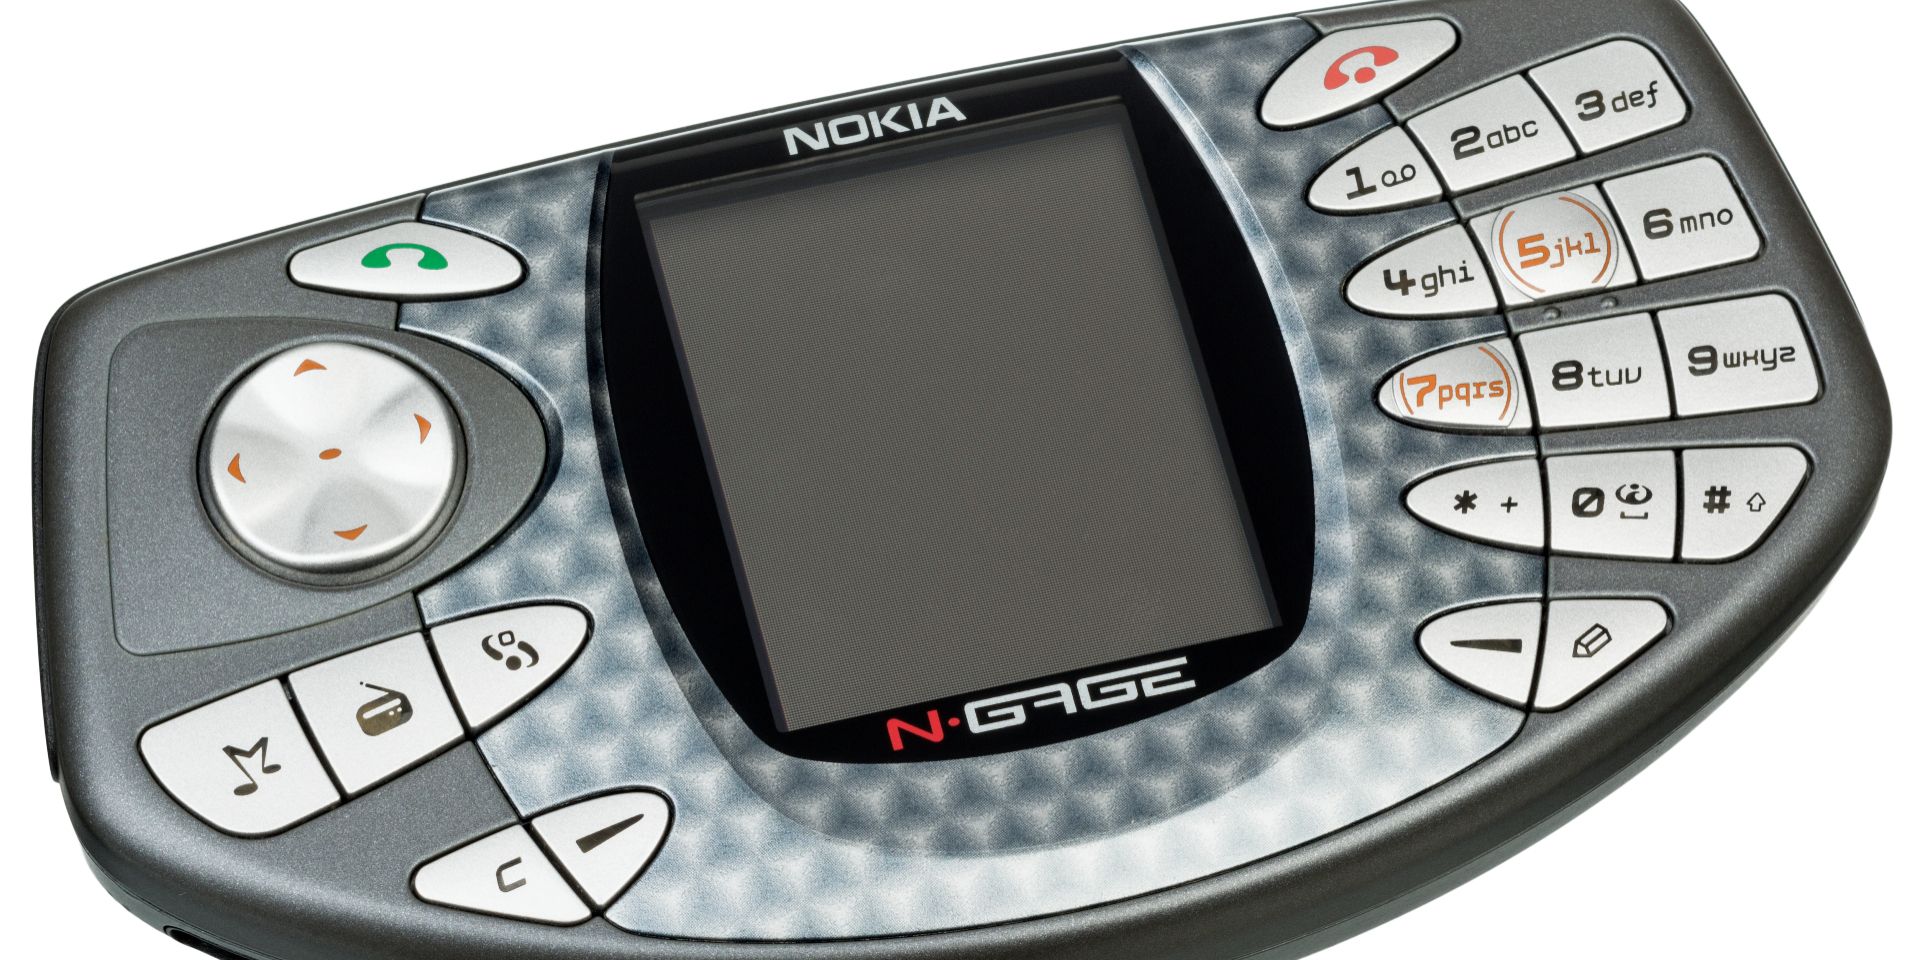 An image of the portable N-Gage system.